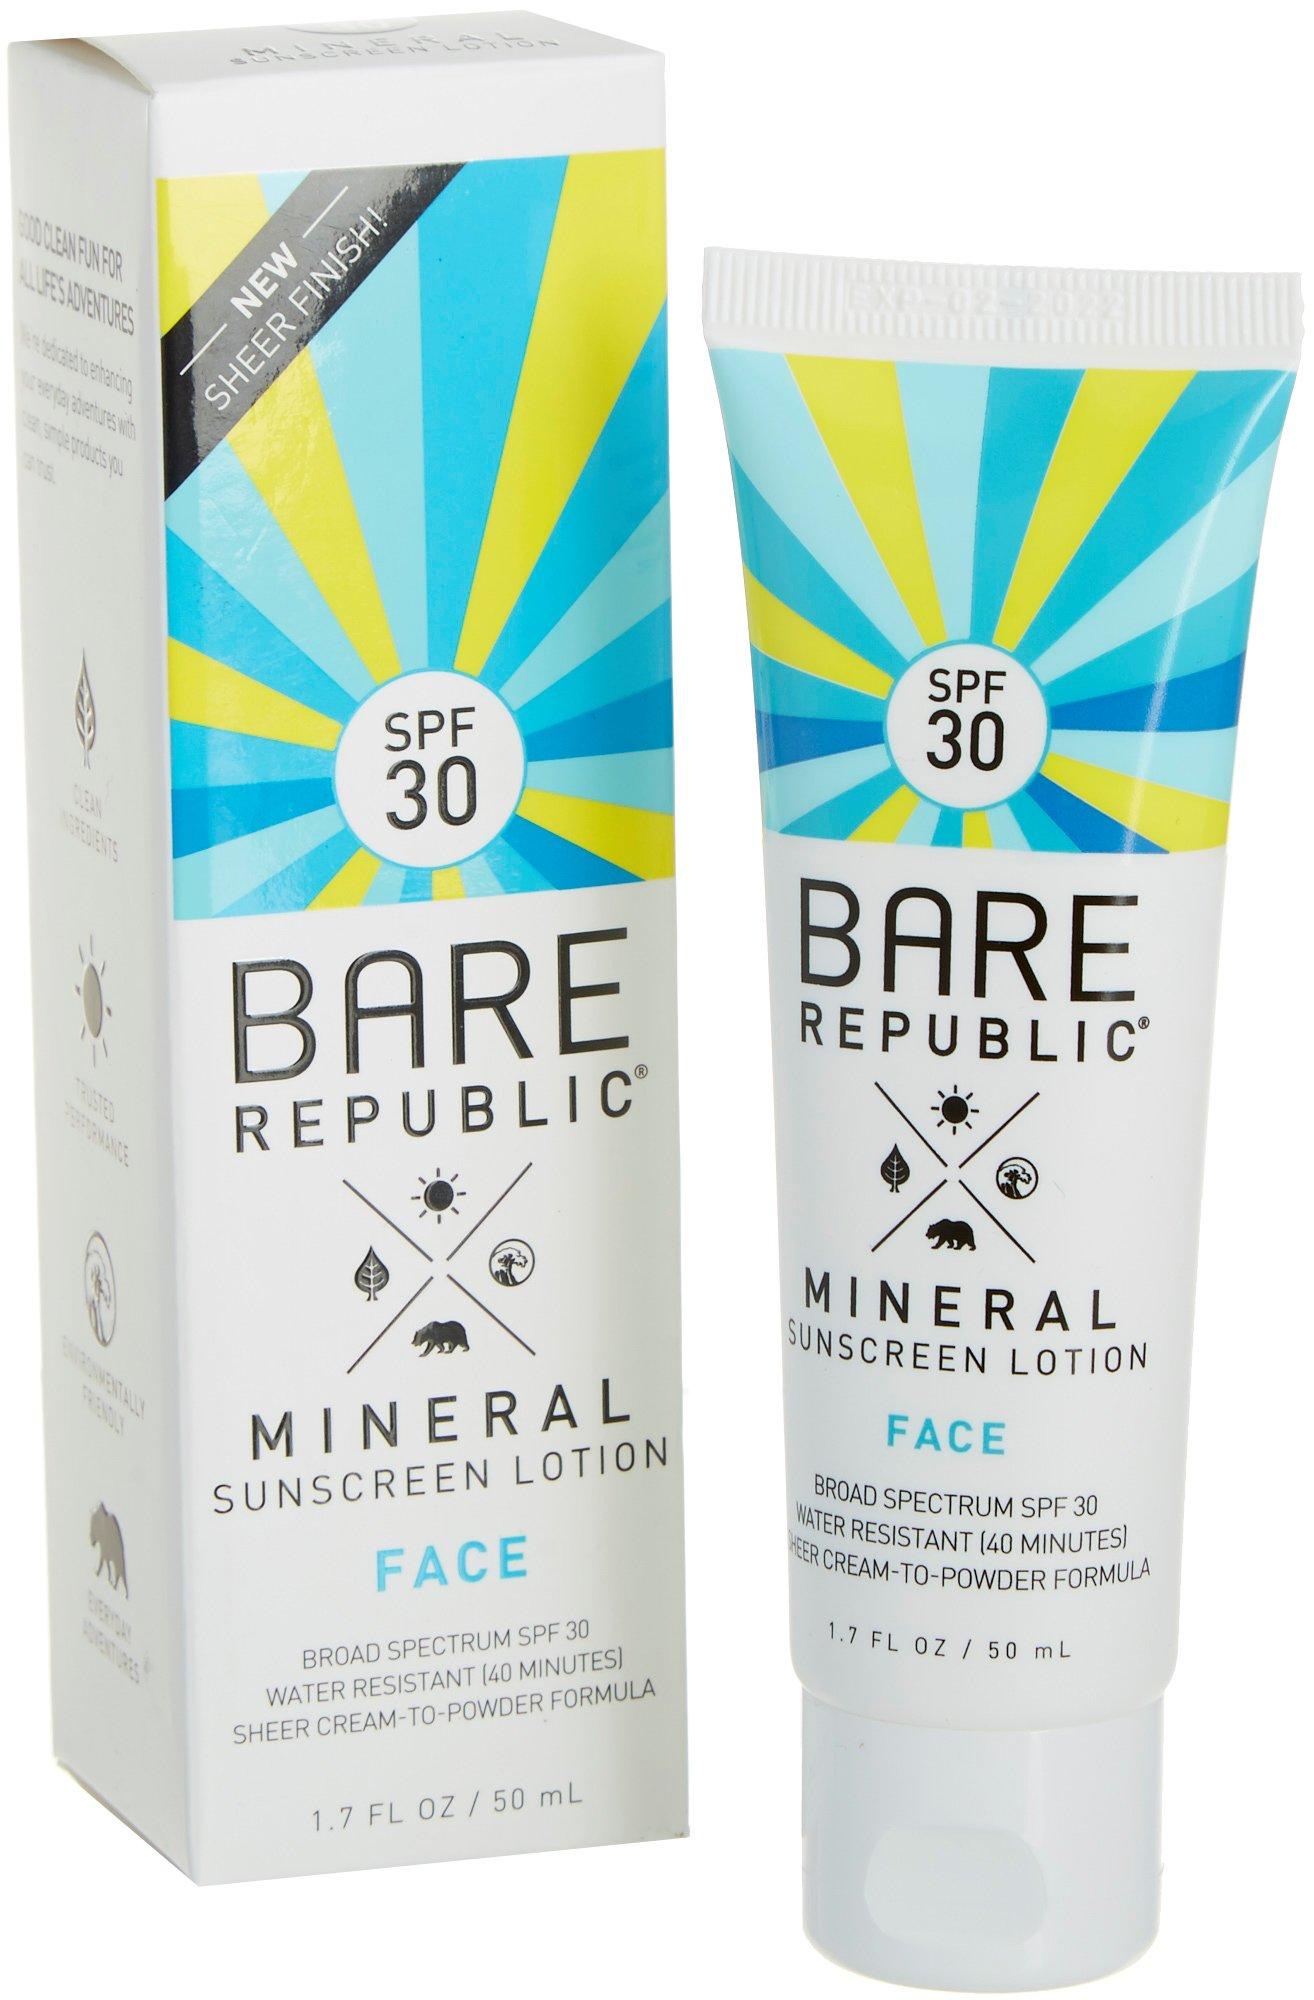 Face SPF 30 Mineral Sunscreen Lotion 1.7 fl.oz